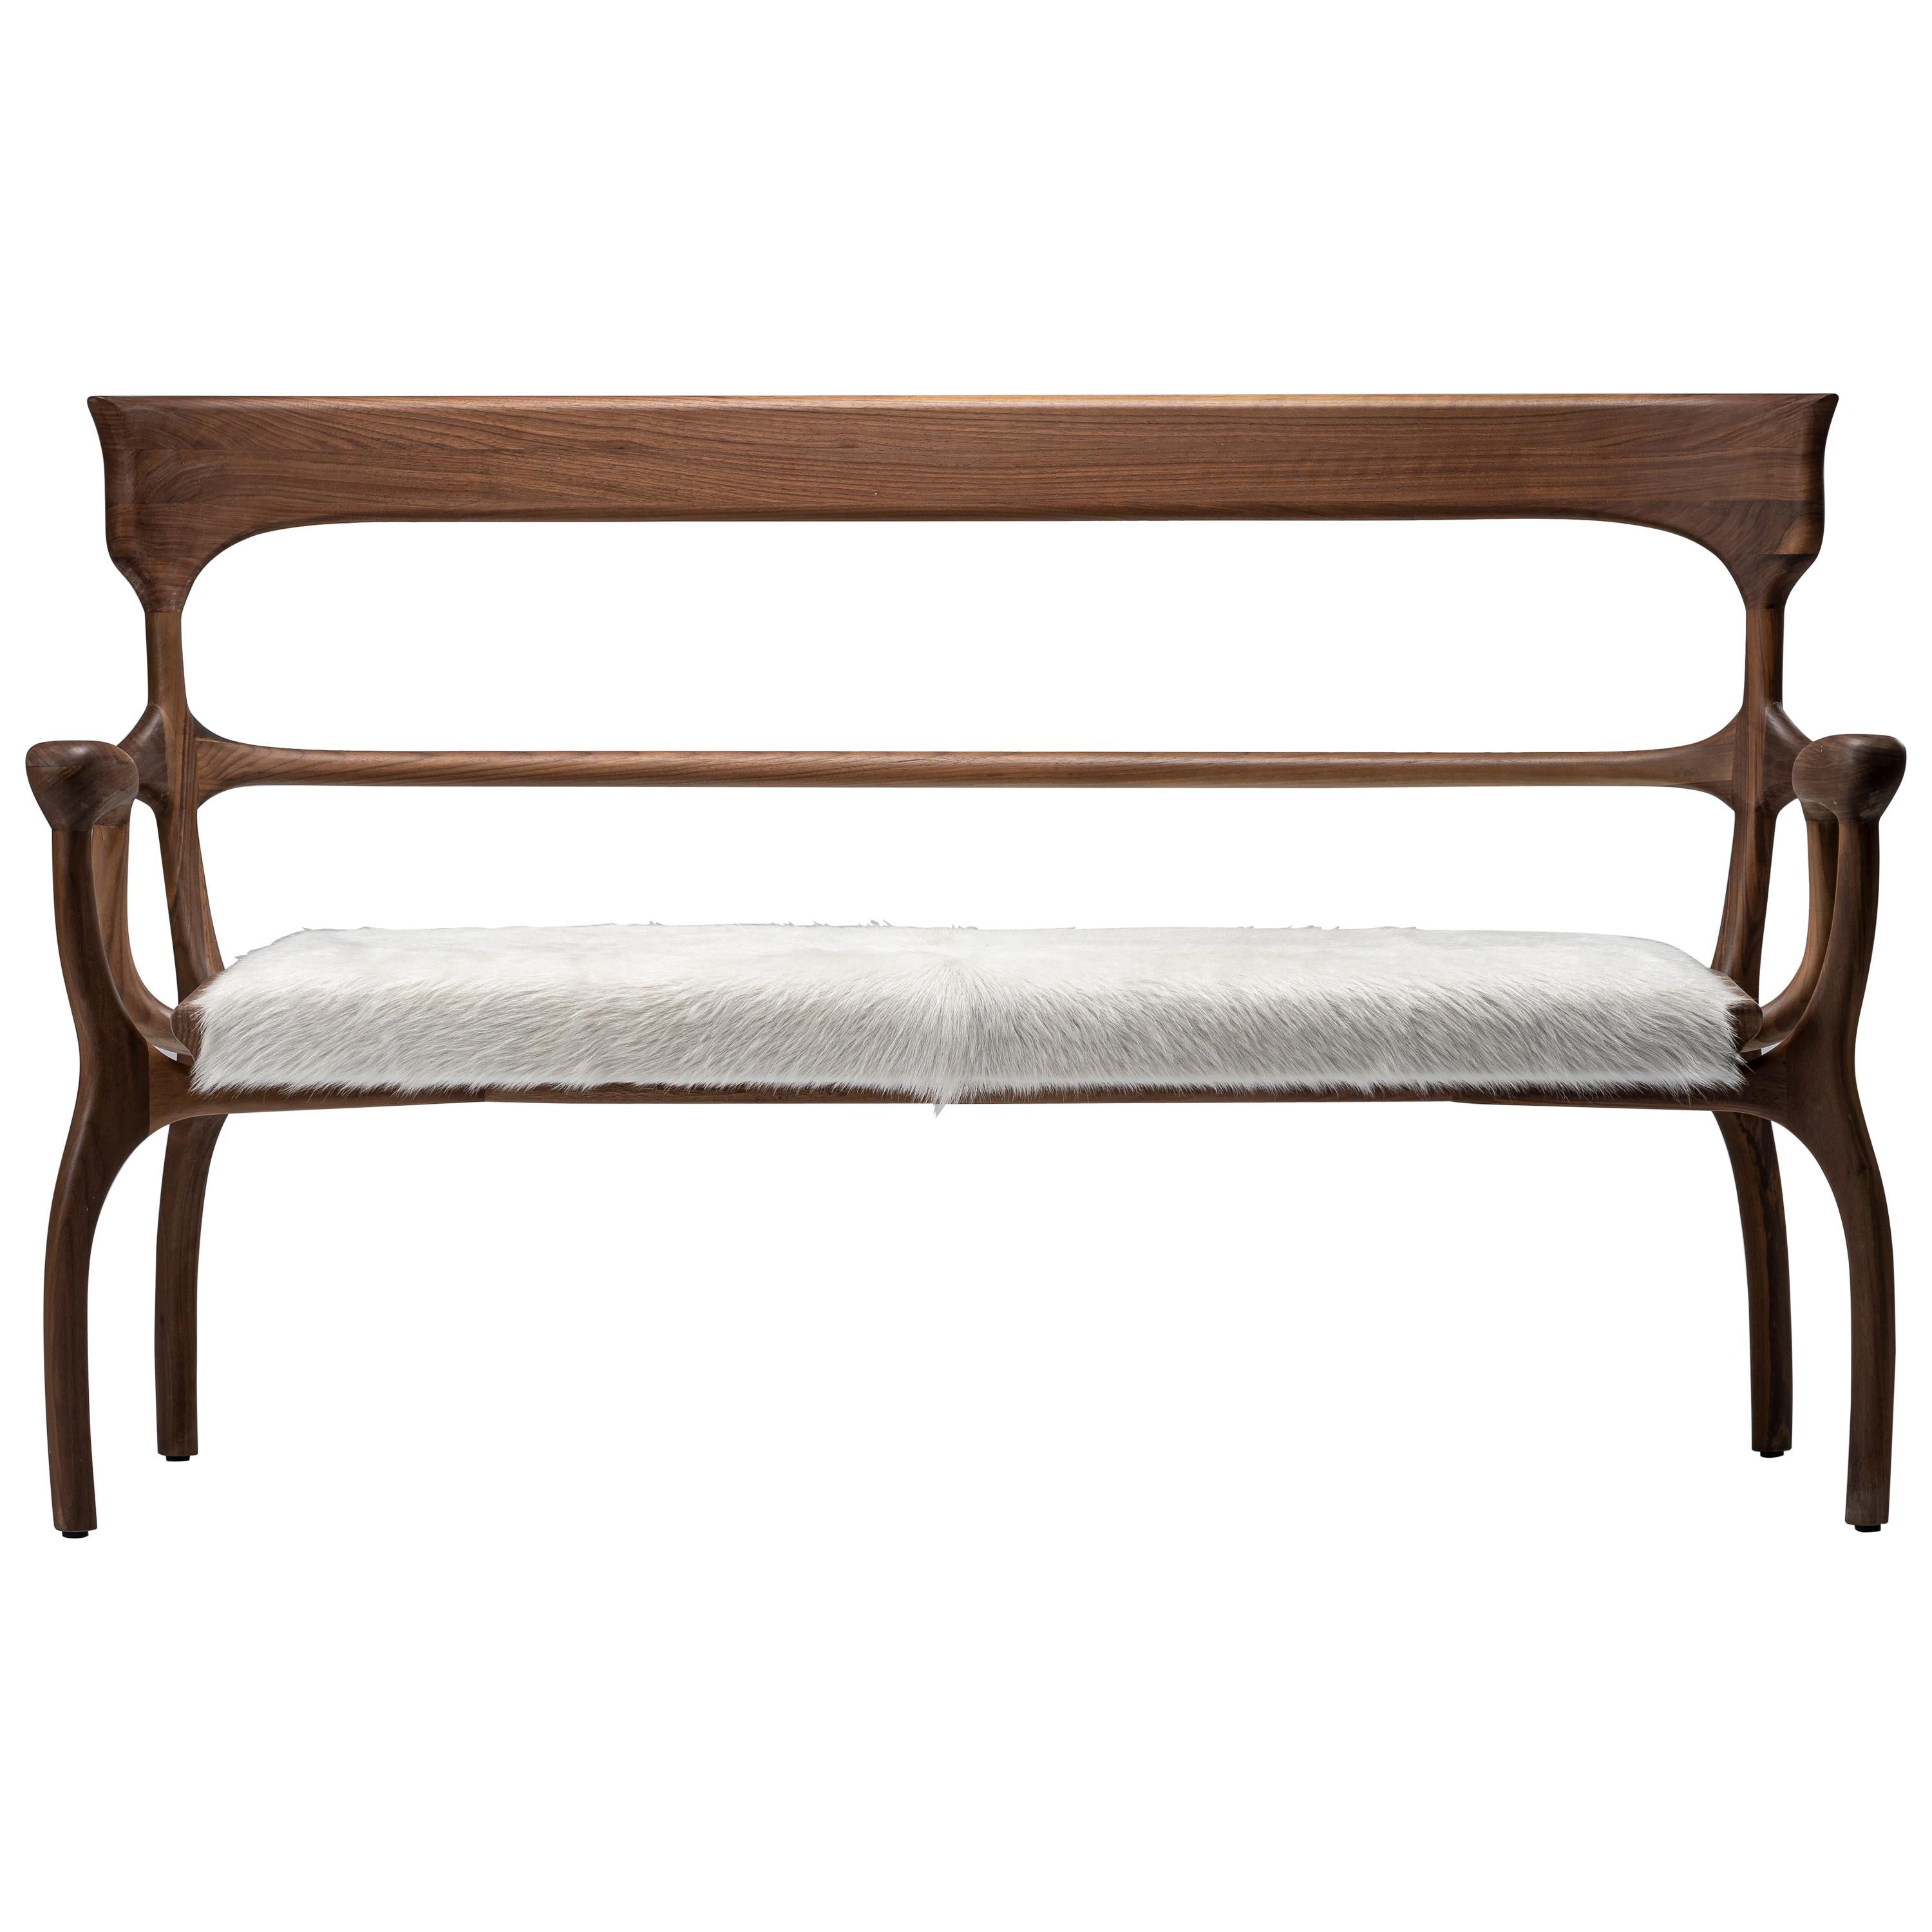 MARTA Walnut Settee/Bench with Cream Leather/Cowhide Seat by Mandy Graham For Sale